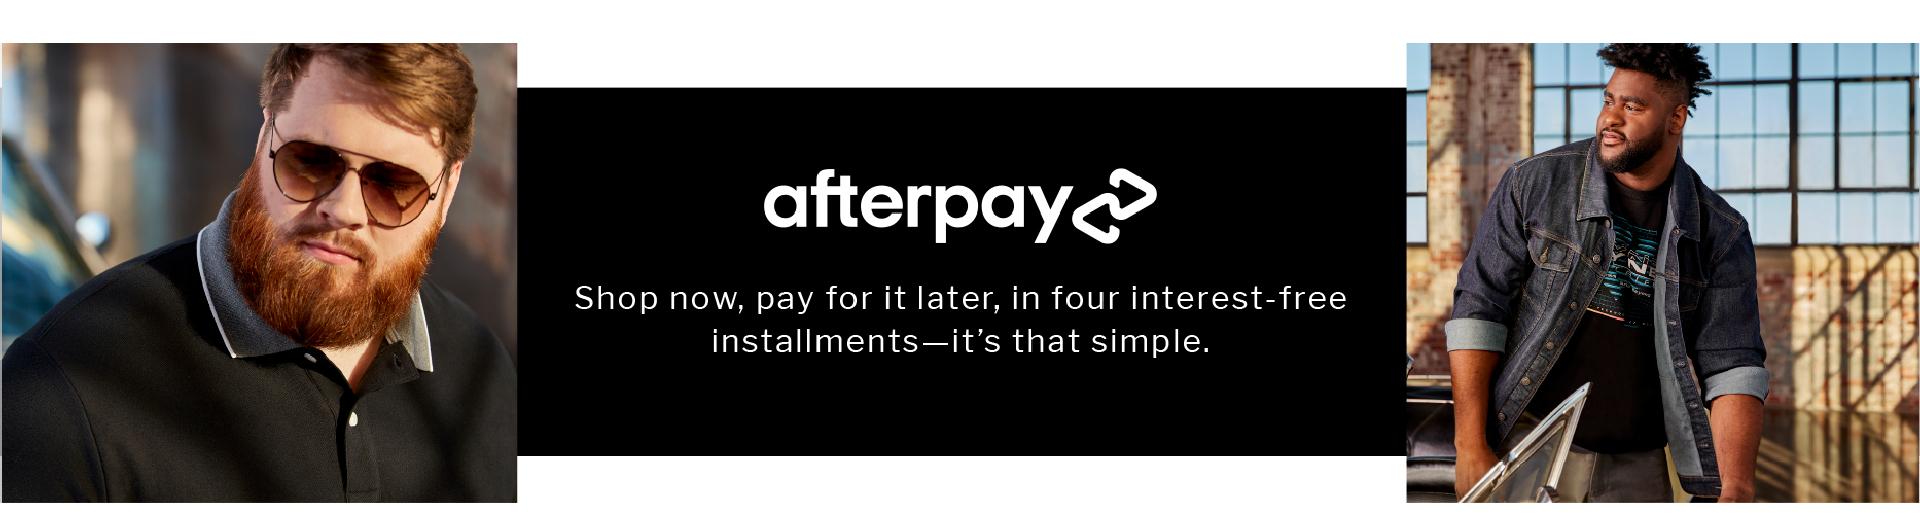 AFTERPAY | Shop now, pay for it later, in four interest-free installments—it’s that simple.